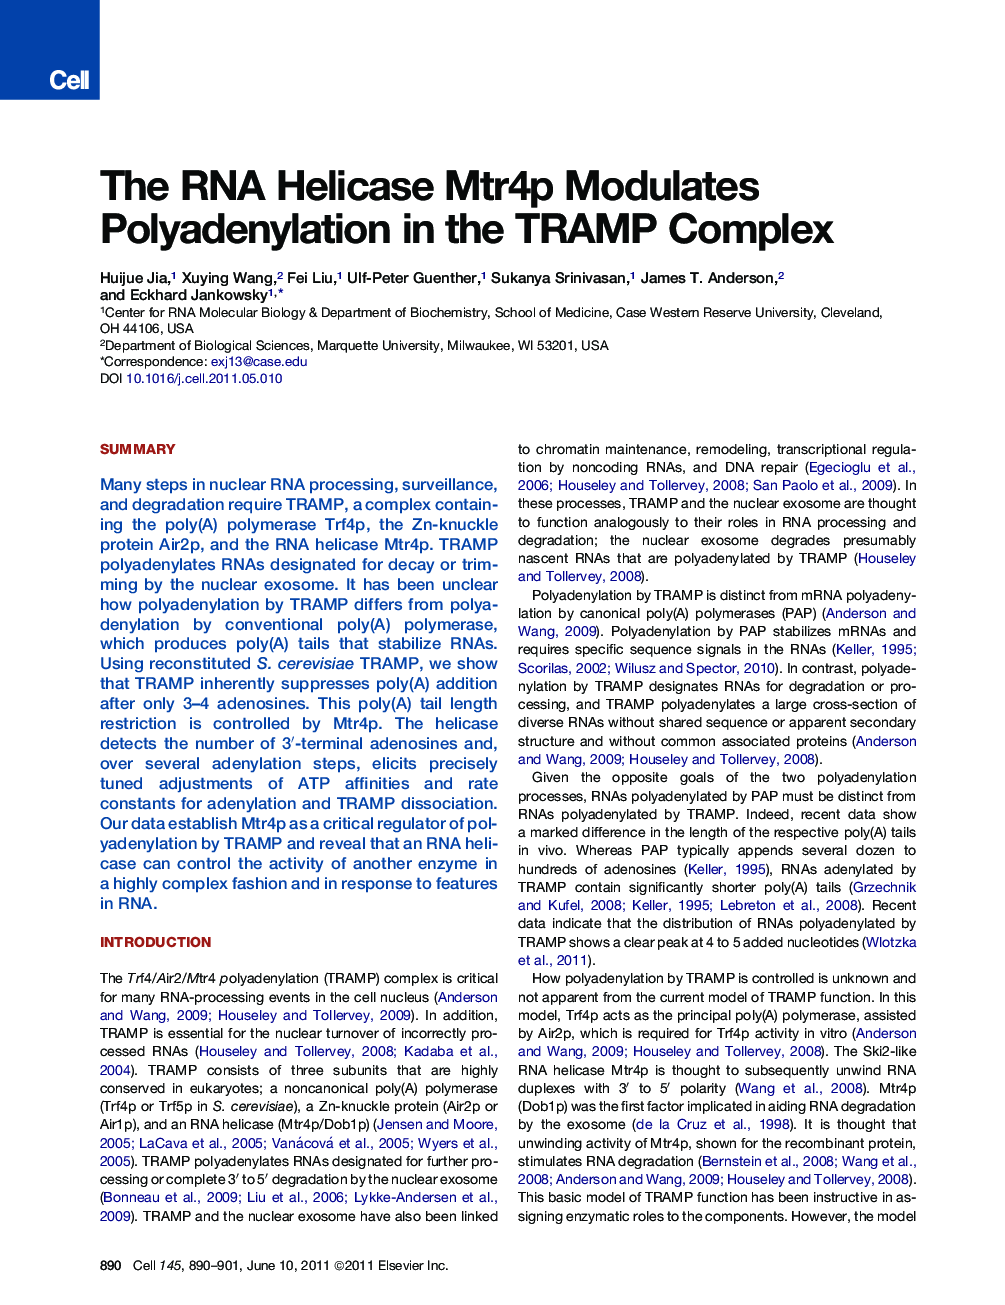 The RNA Helicase Mtr4p Modulates Polyadenylation in the TRAMP Complex